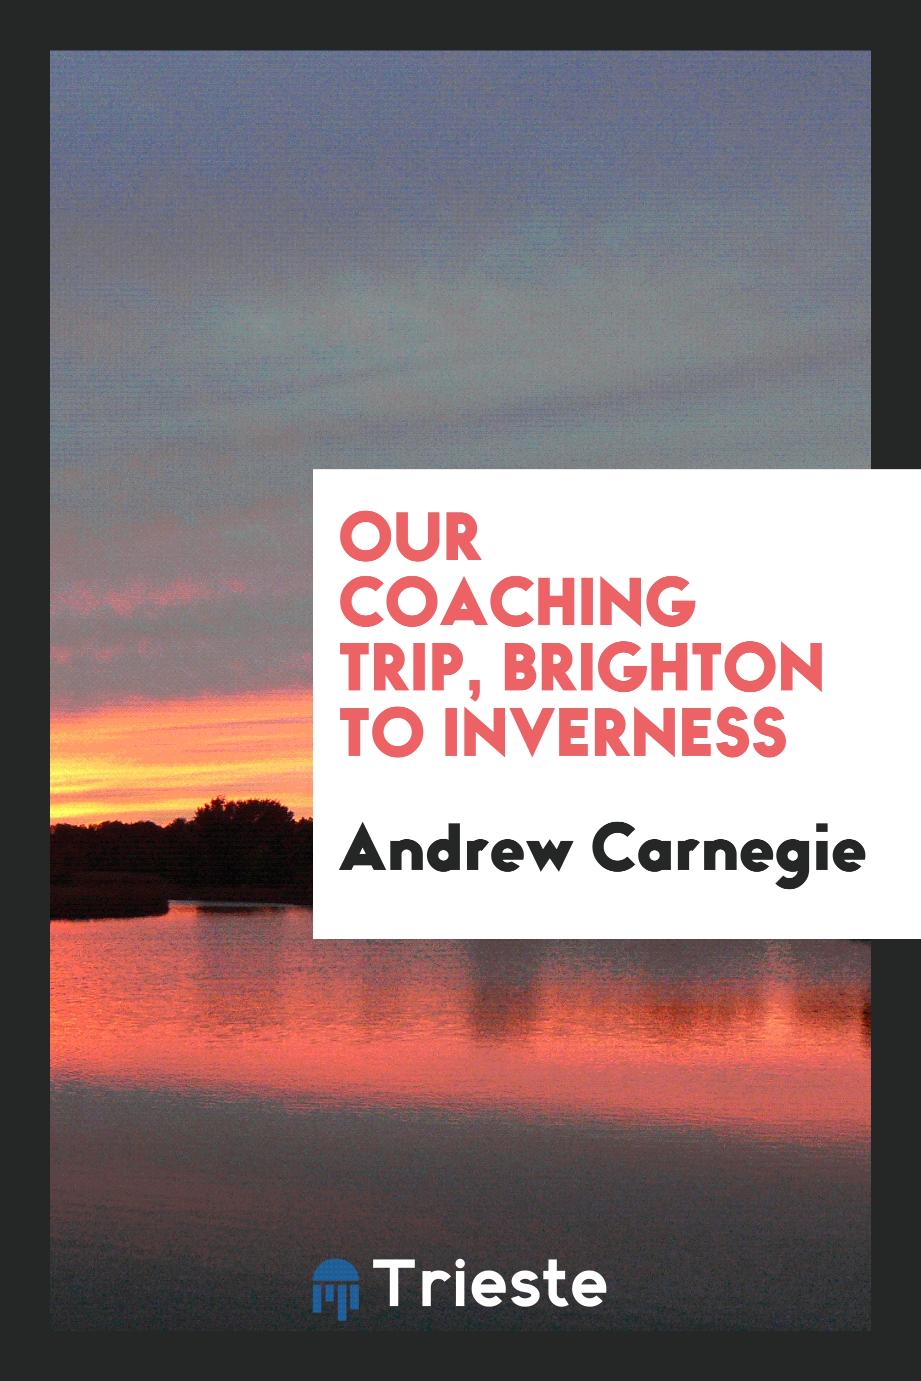 Our coaching trip, Brighton to Inverness